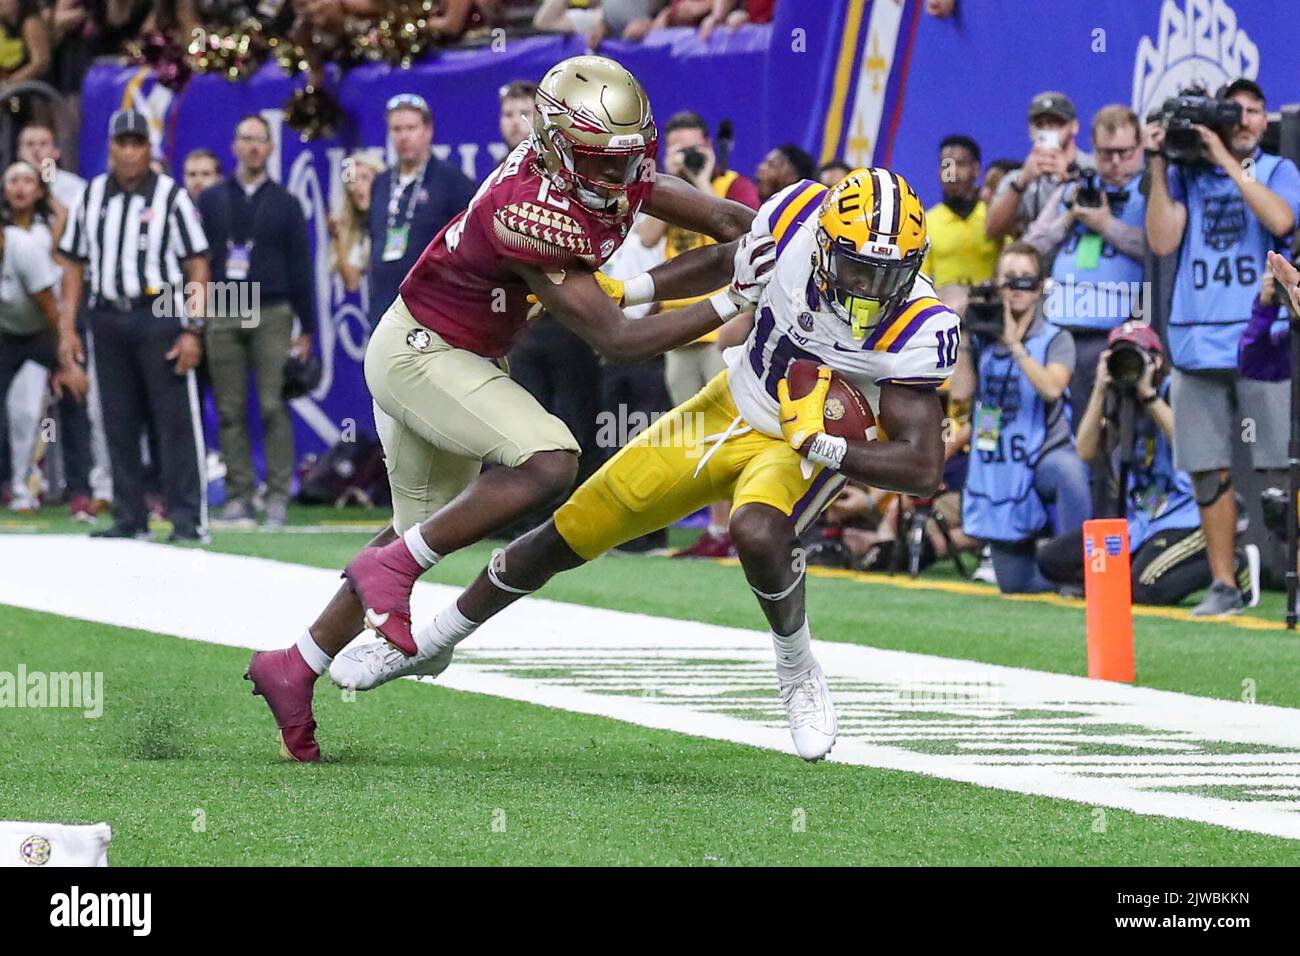 New Orleans, USA. September 4, 2022: during the Allstate Louisiana Kickoff Game between the Florida St. Seminoles and the LSU Tigers at the Caesars Superdome in New Orleans, LA. Jonathan Mailhes/CSM Credit: Cal Sport Media/Alamy Live News Stock Photo